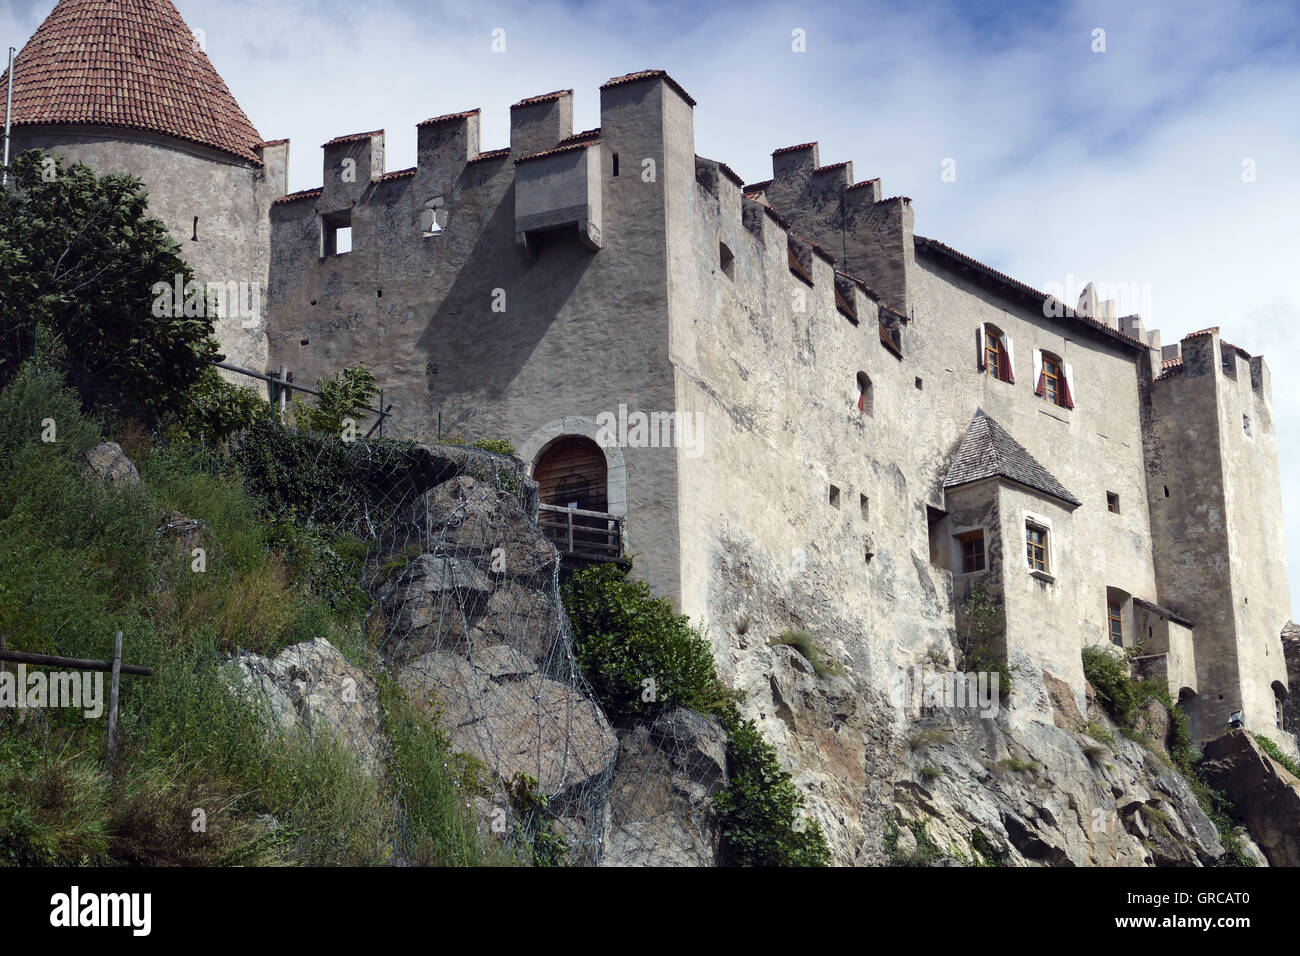 Castle, Fortification Near Meran In South Tyrol, Italy, Europe Stock Photo